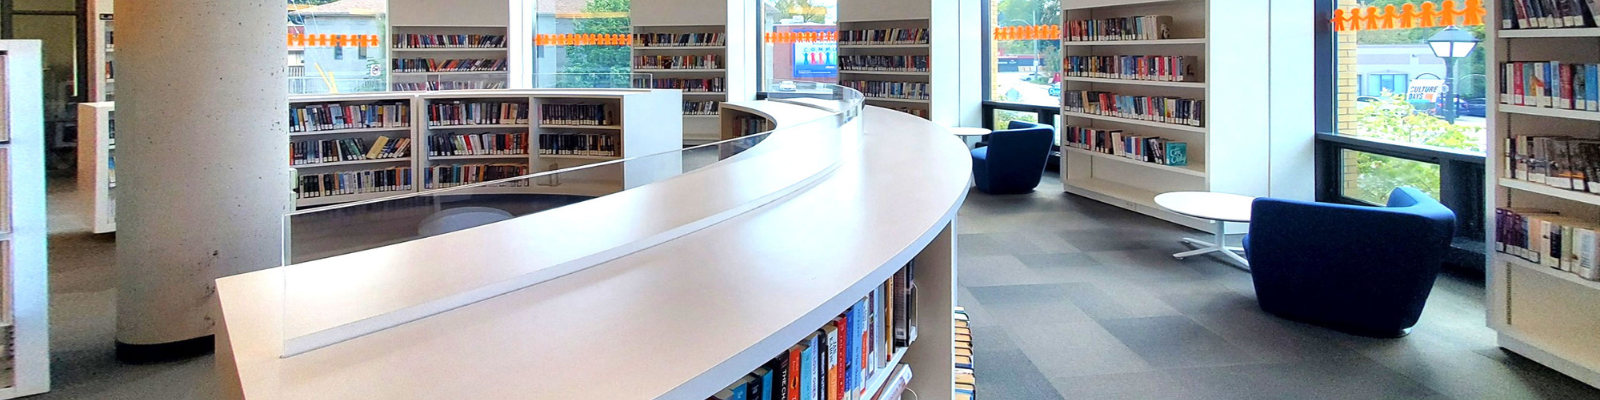 The book shelves and cozy seating in Aurora Public Library